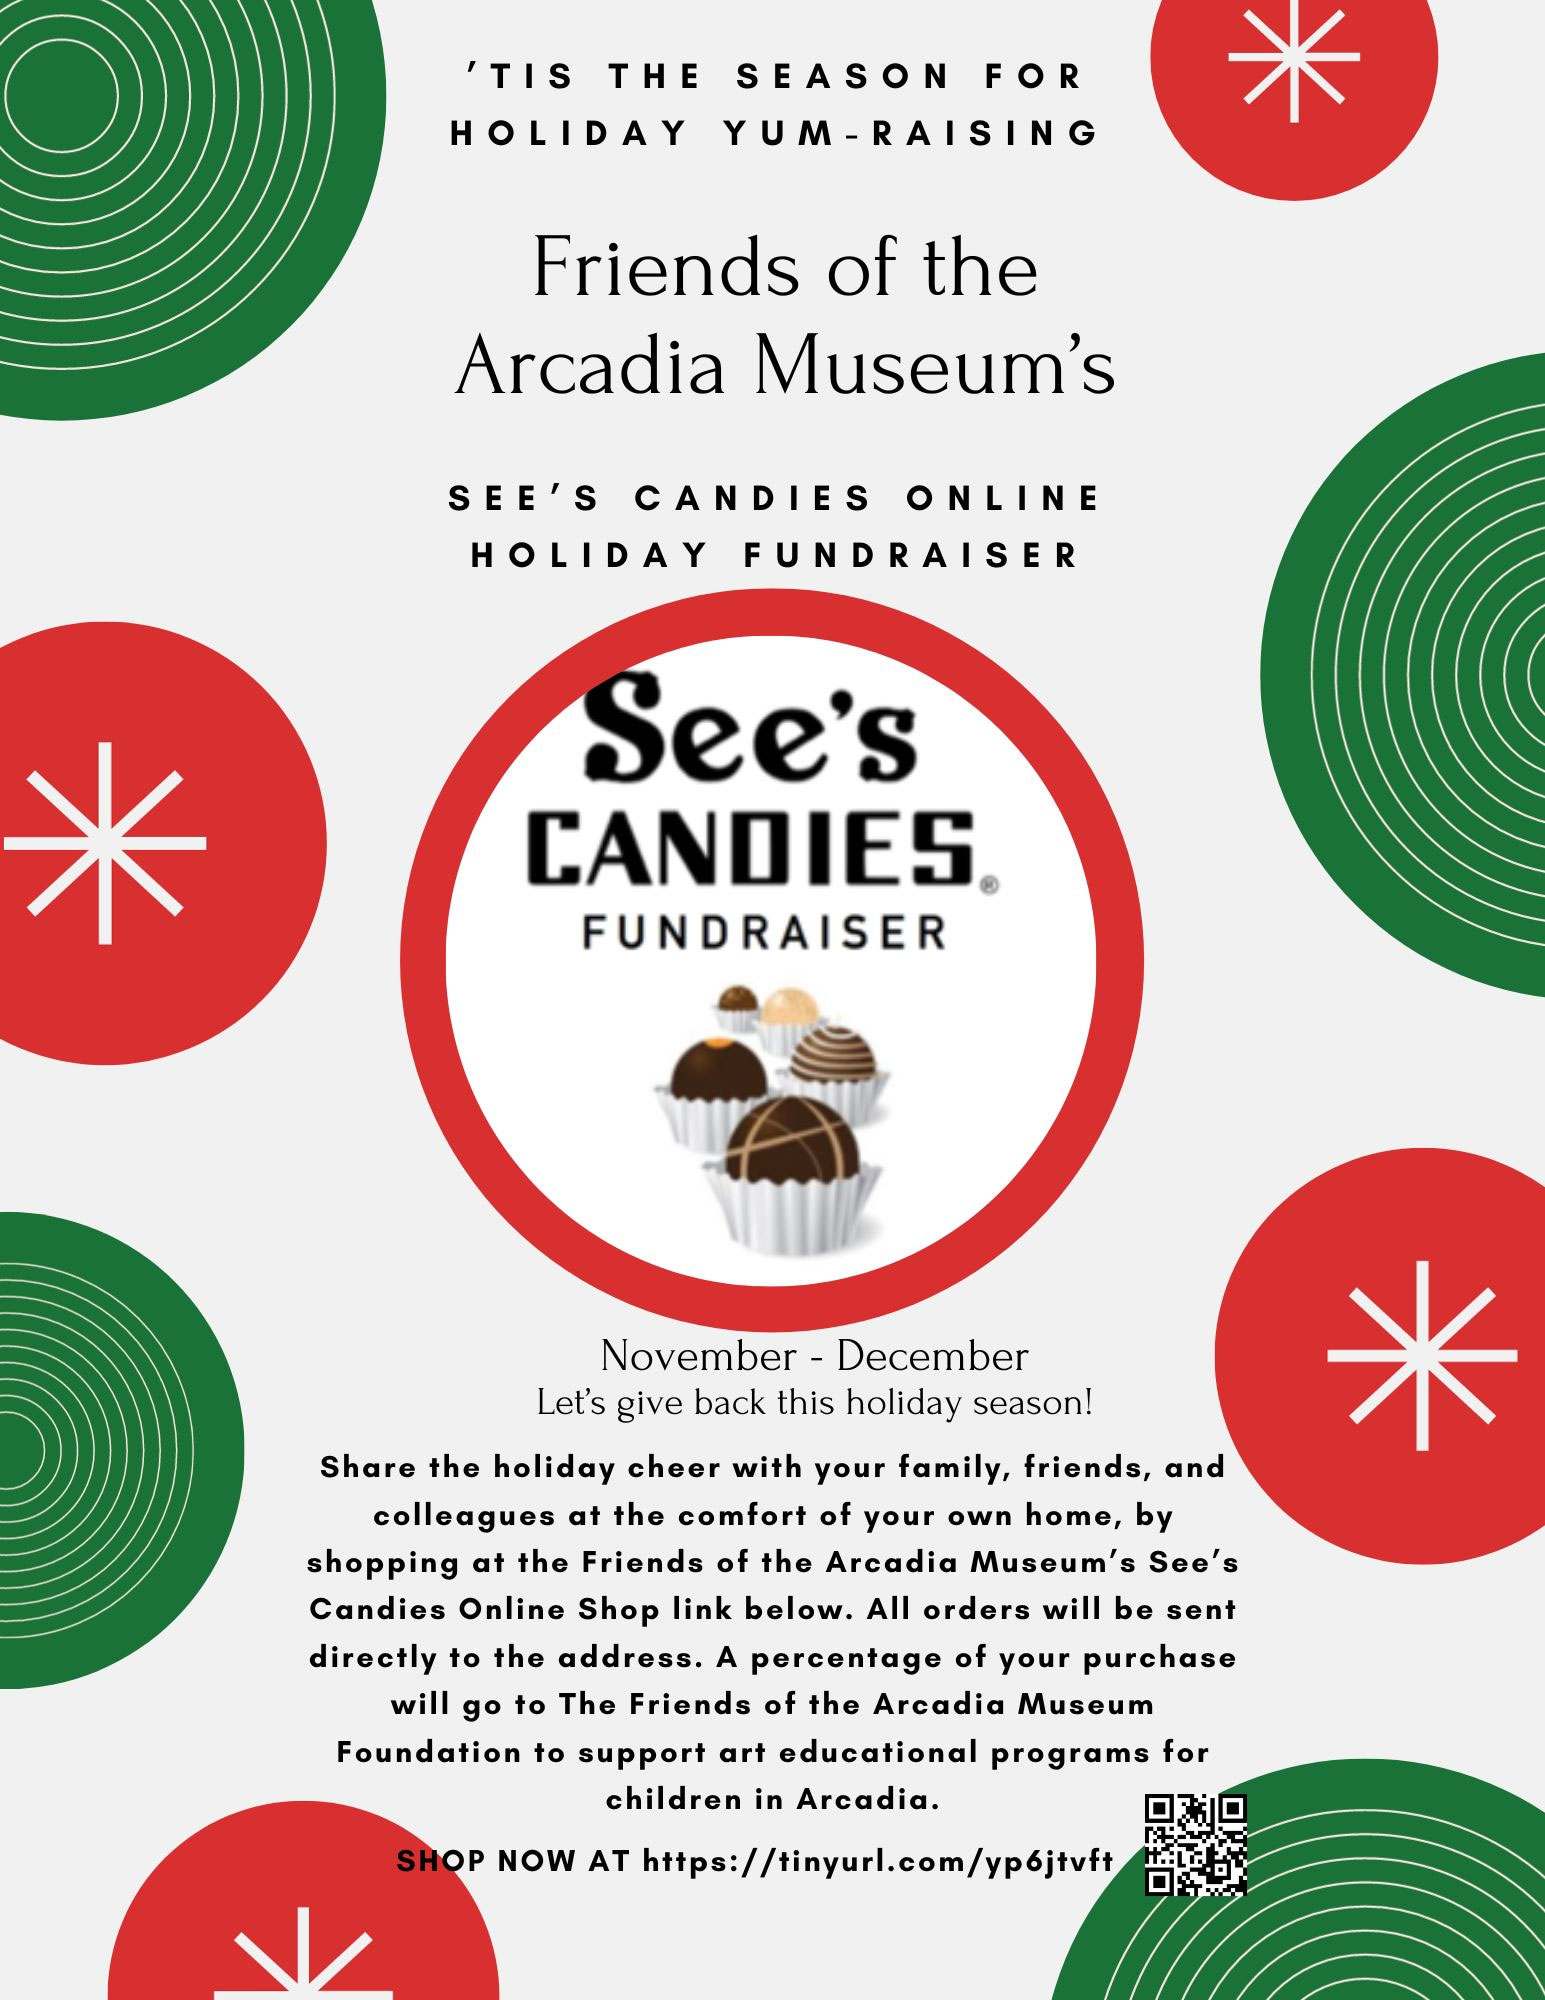 Friends of the Museum See's Candies fundraiser 